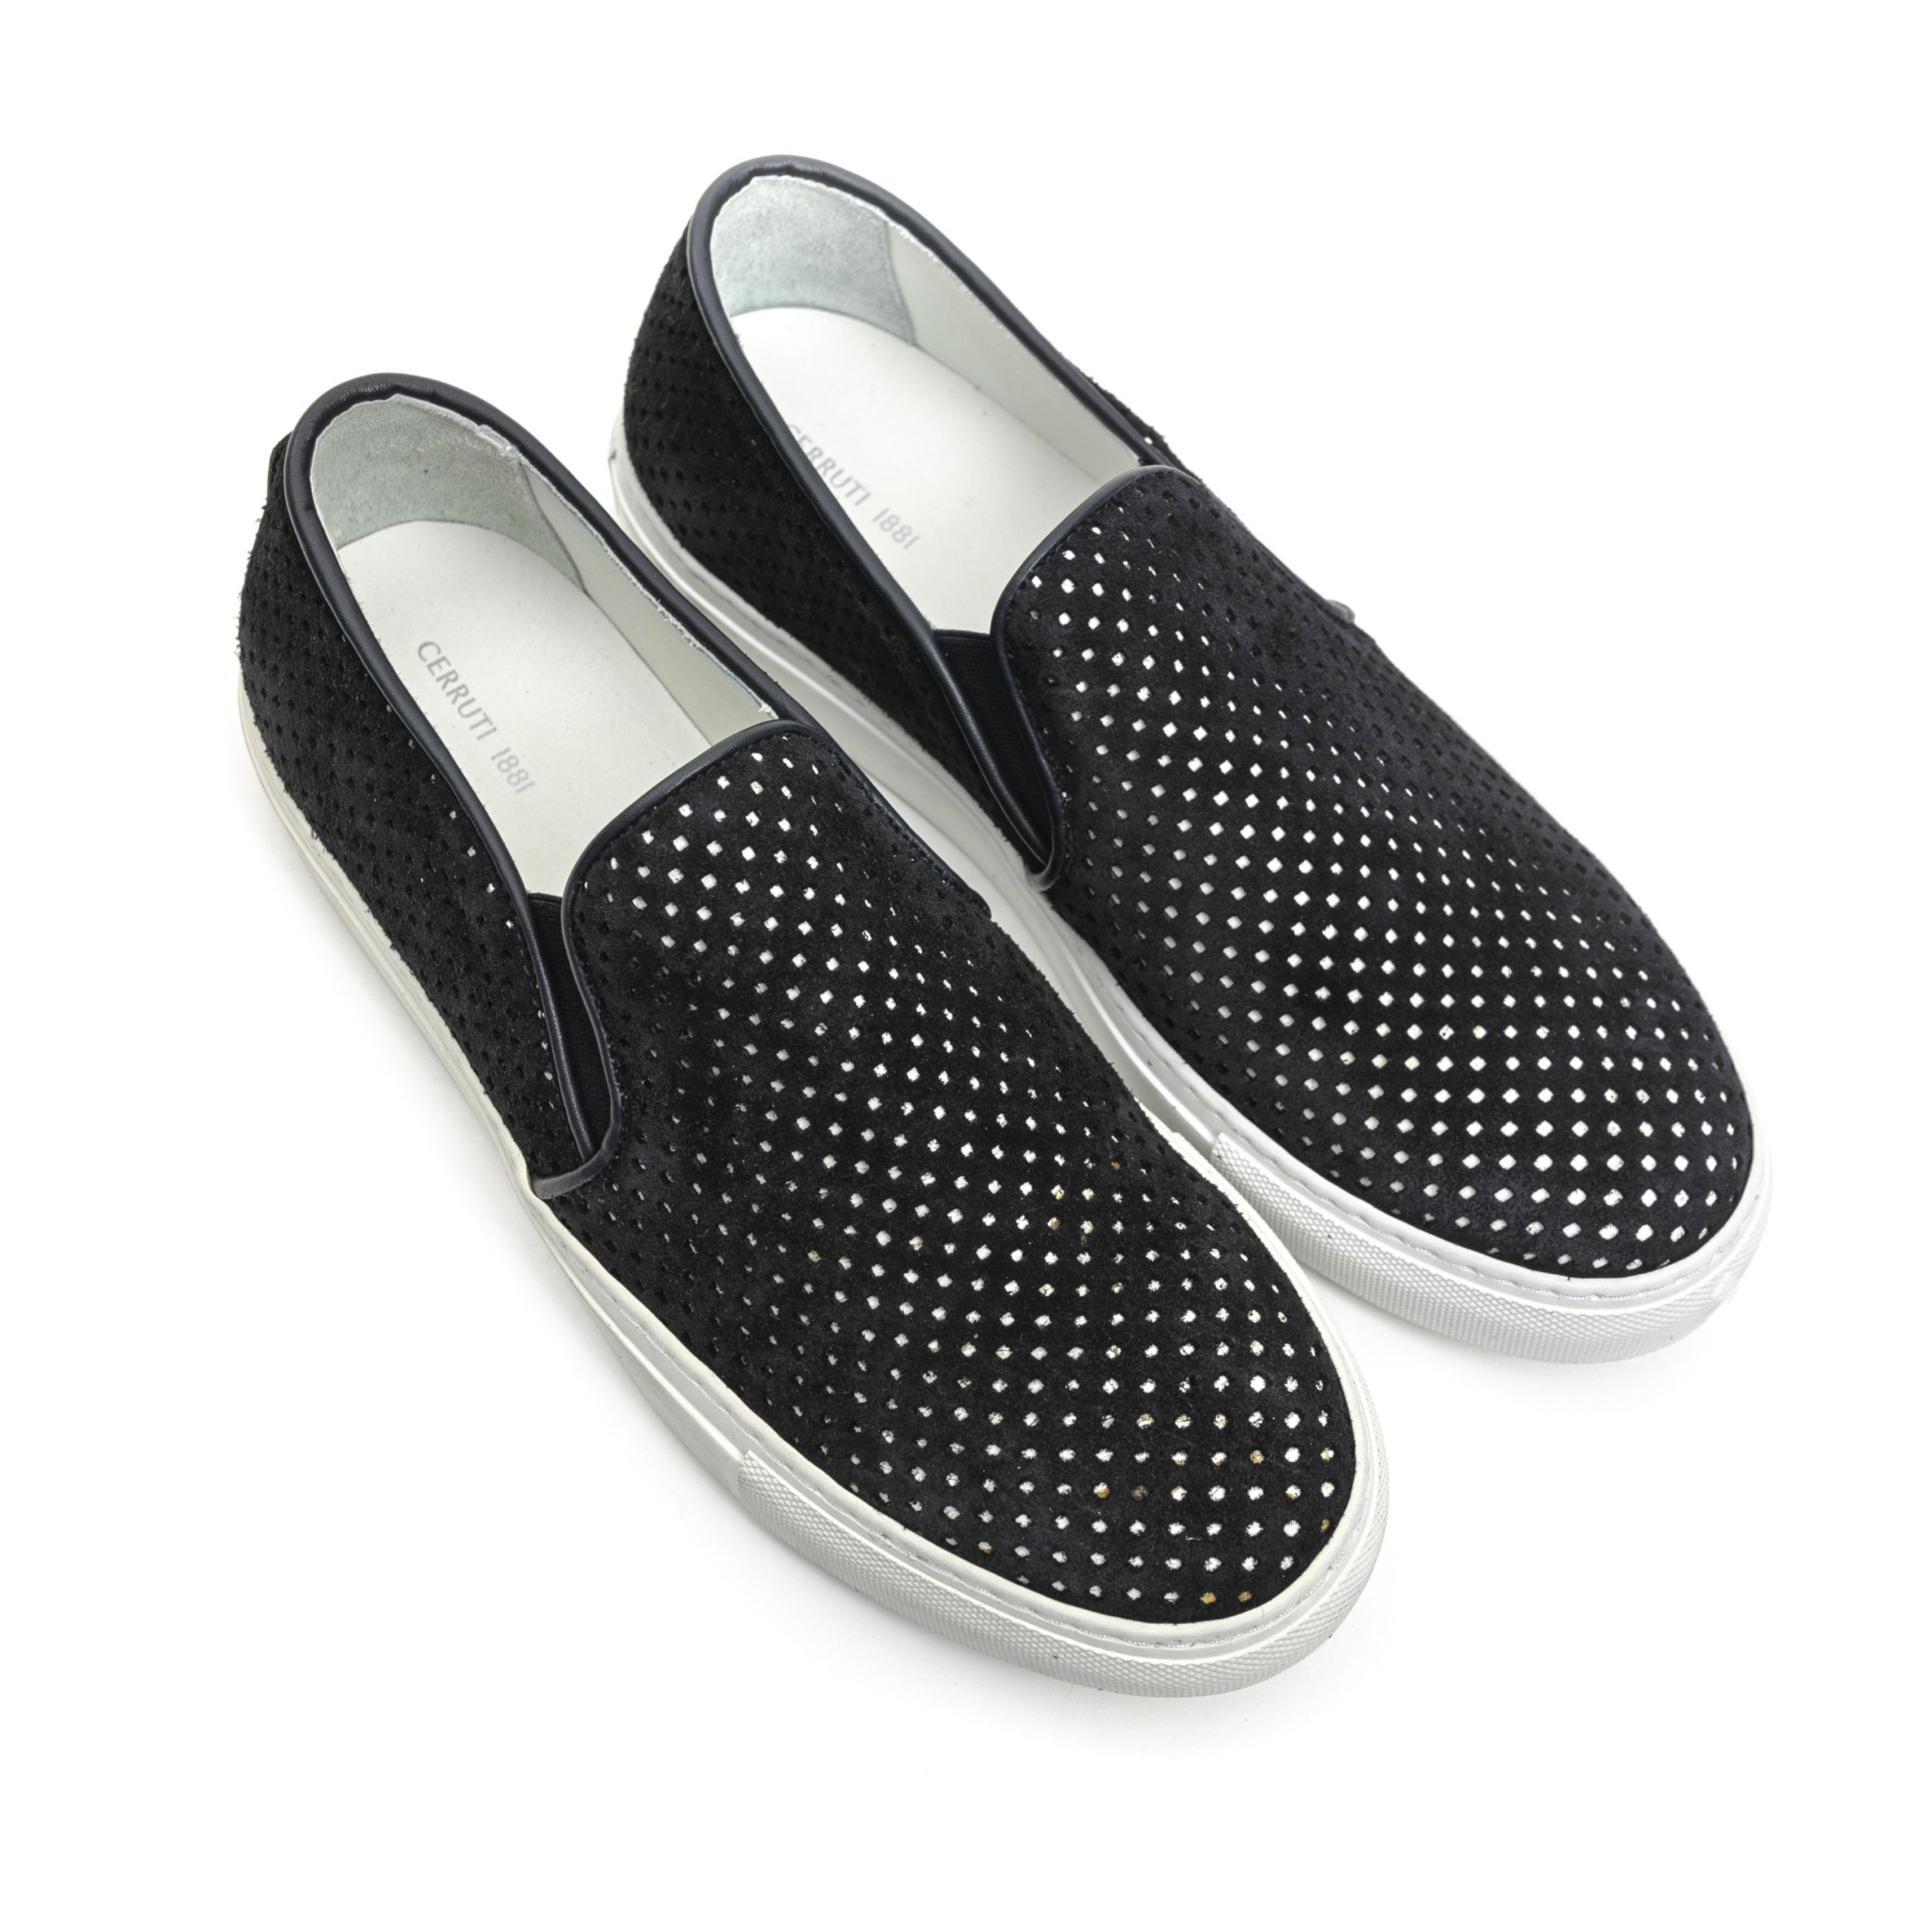 <p>Slip-on Shoes. Perforated Suede And Leather Edges. Rubber Sole</p>